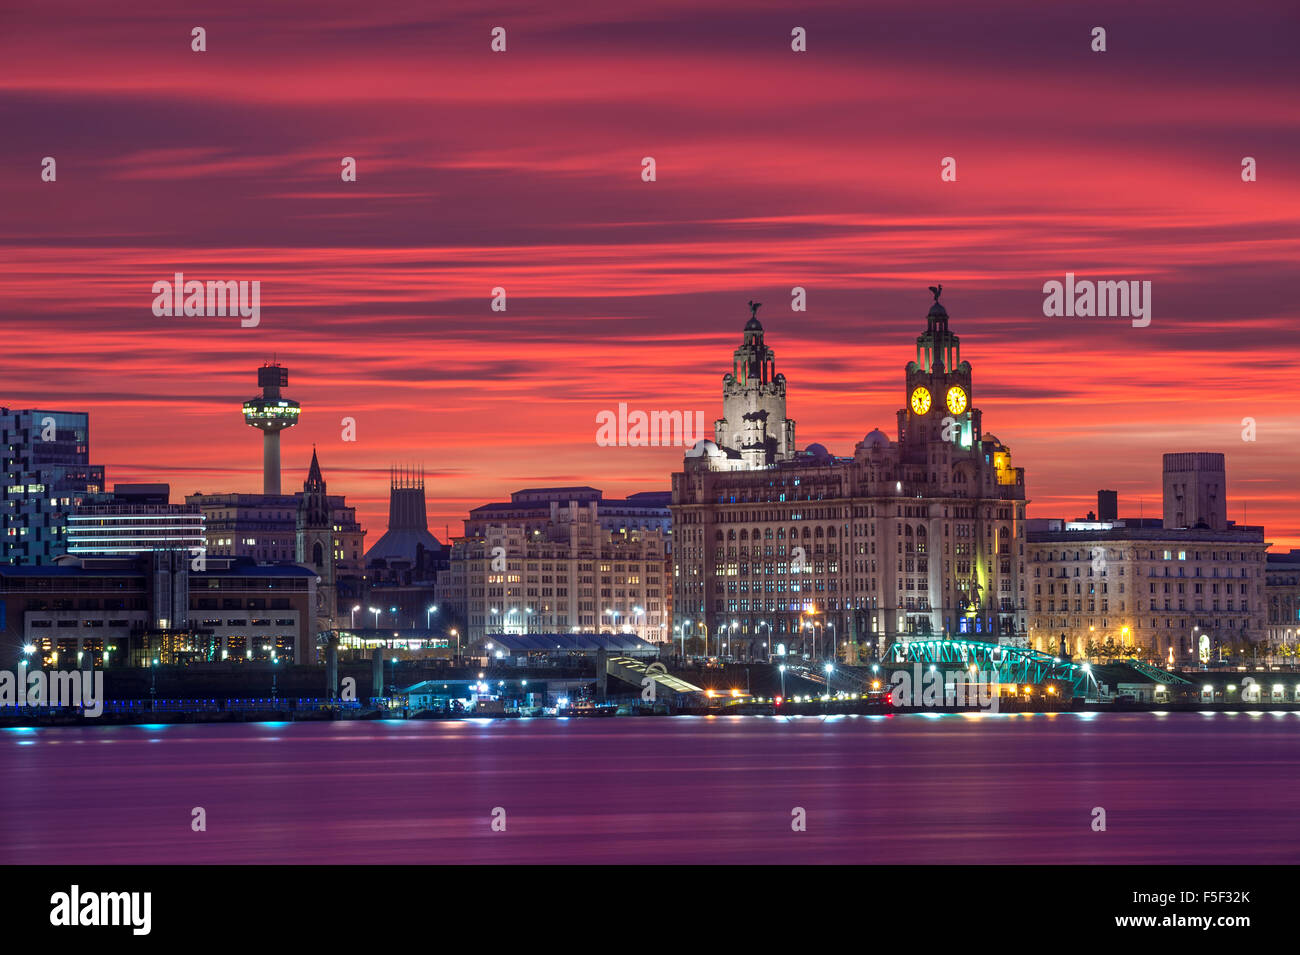 The Liverpool City Skyline with blood red sky, Liverpool, Merseyside, England, UK Stock Photo